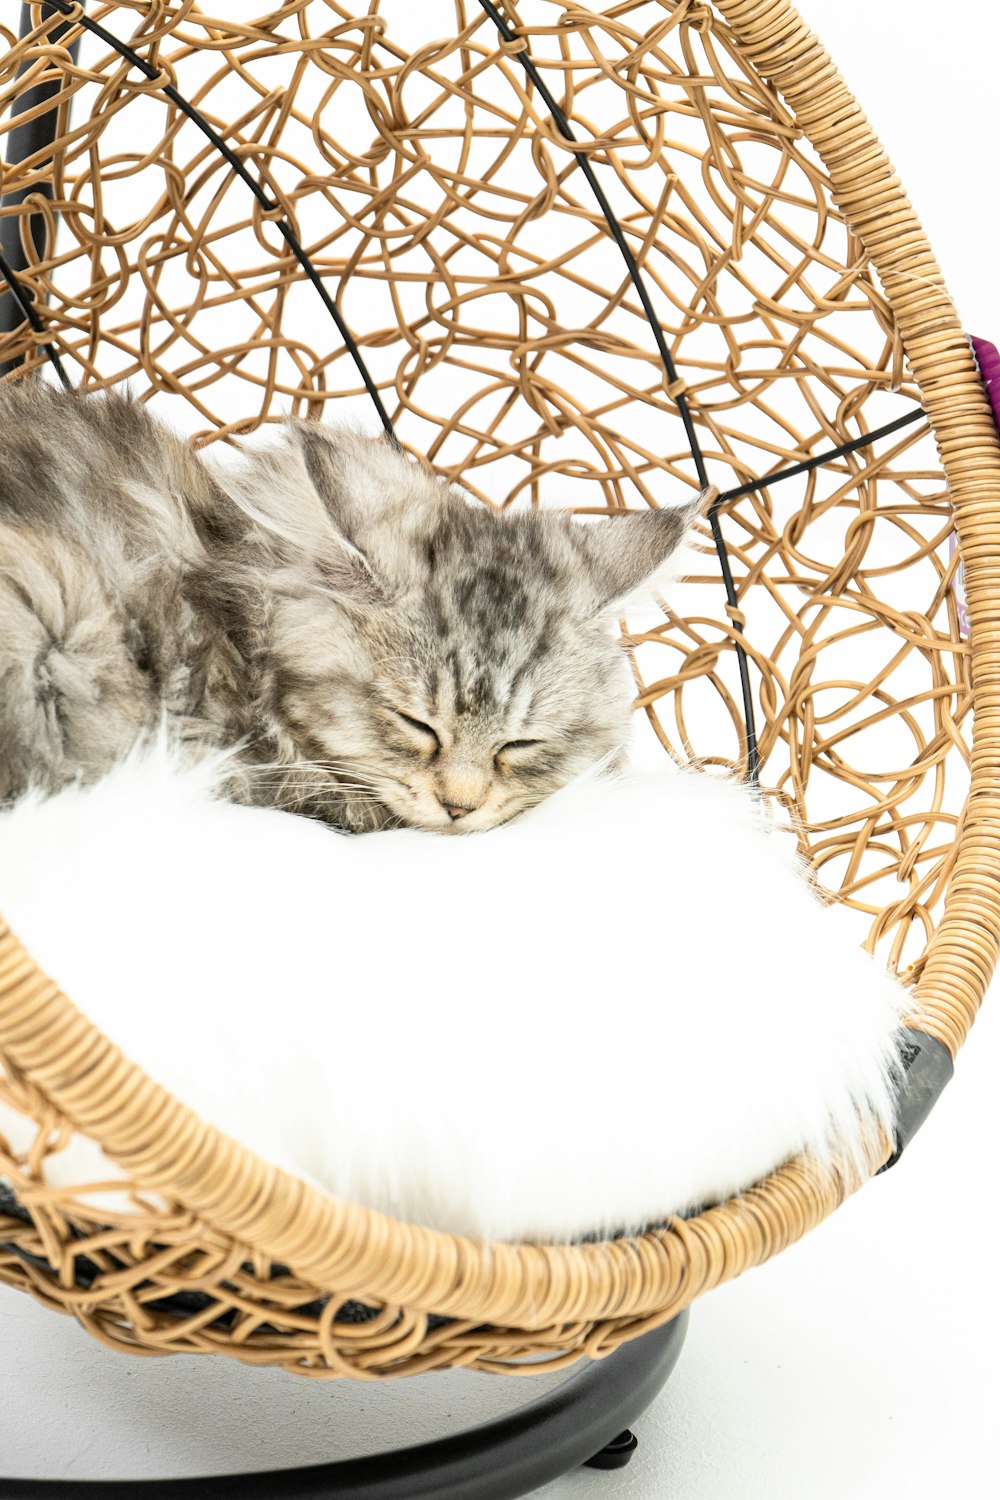 two kittens are sleeping in a wicker chair